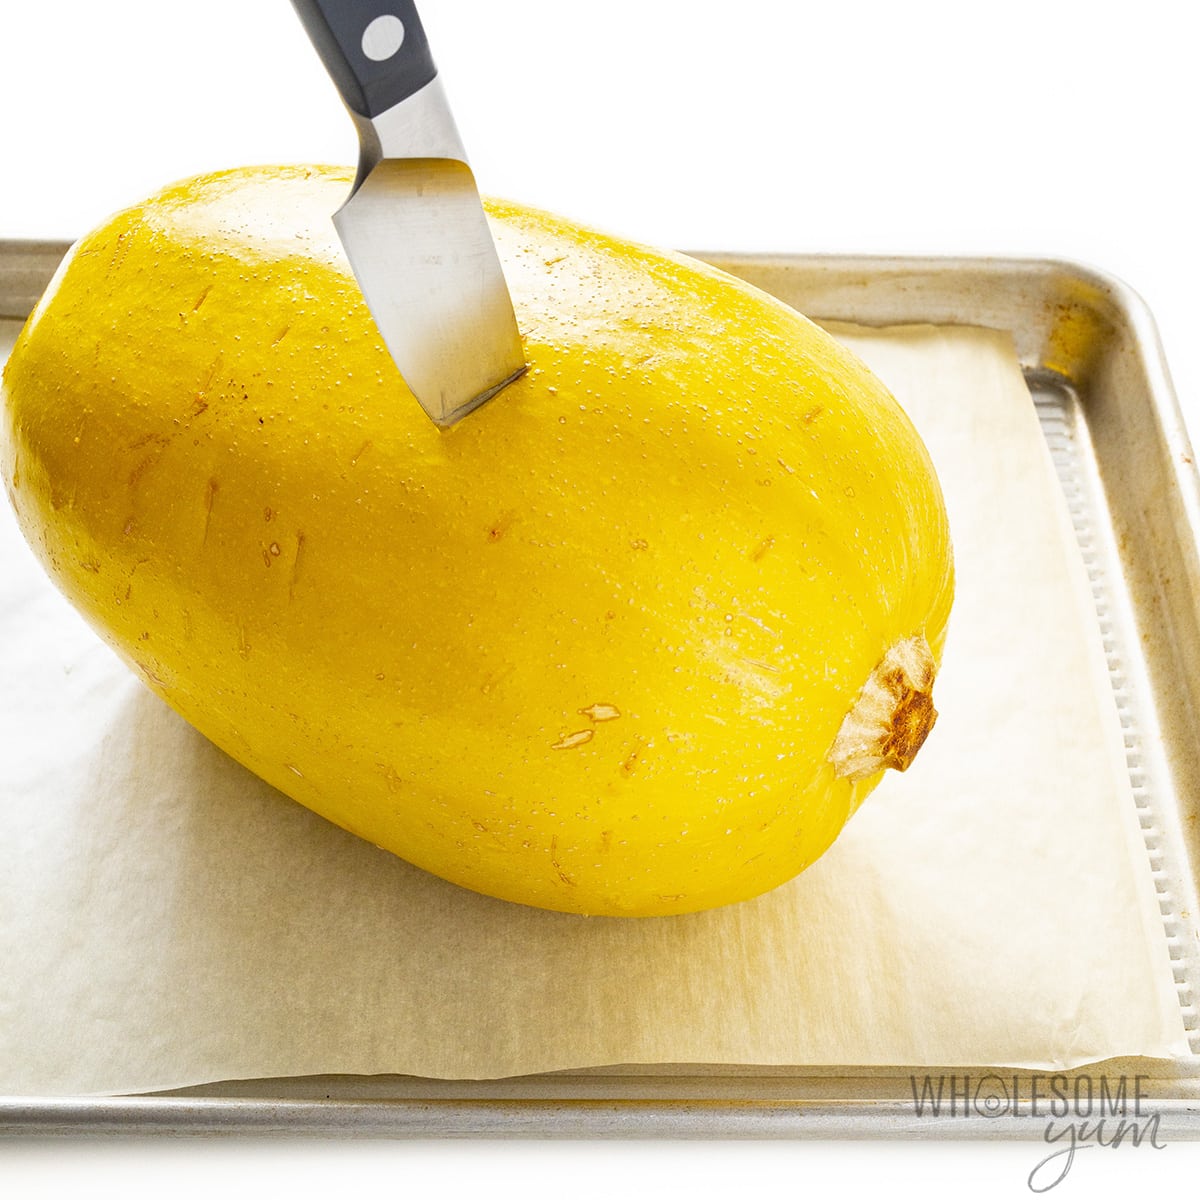 Cooked squash with knife inserted.